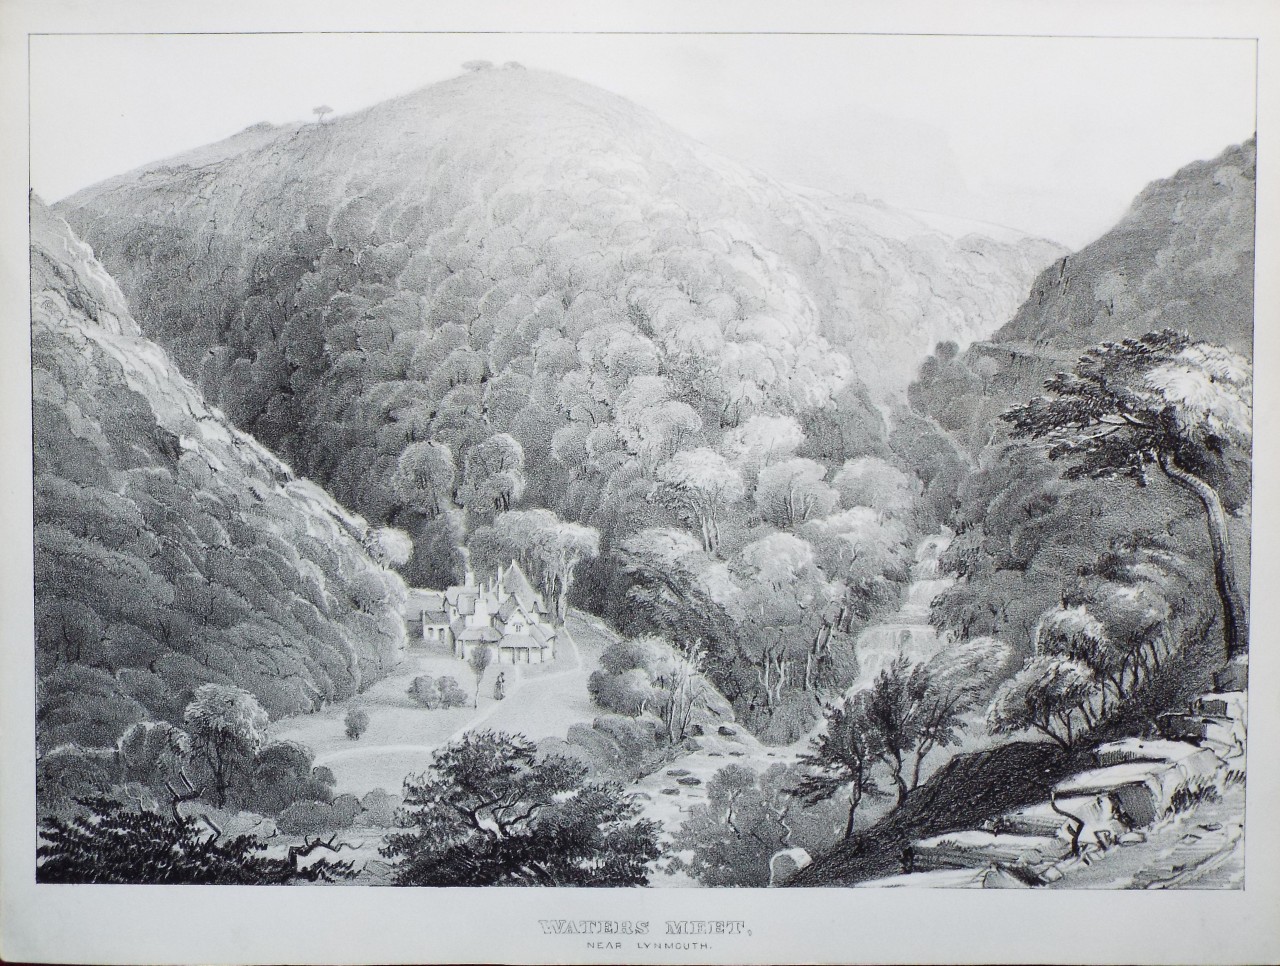 Lithograph - Waters Meet, near Lynmouth.